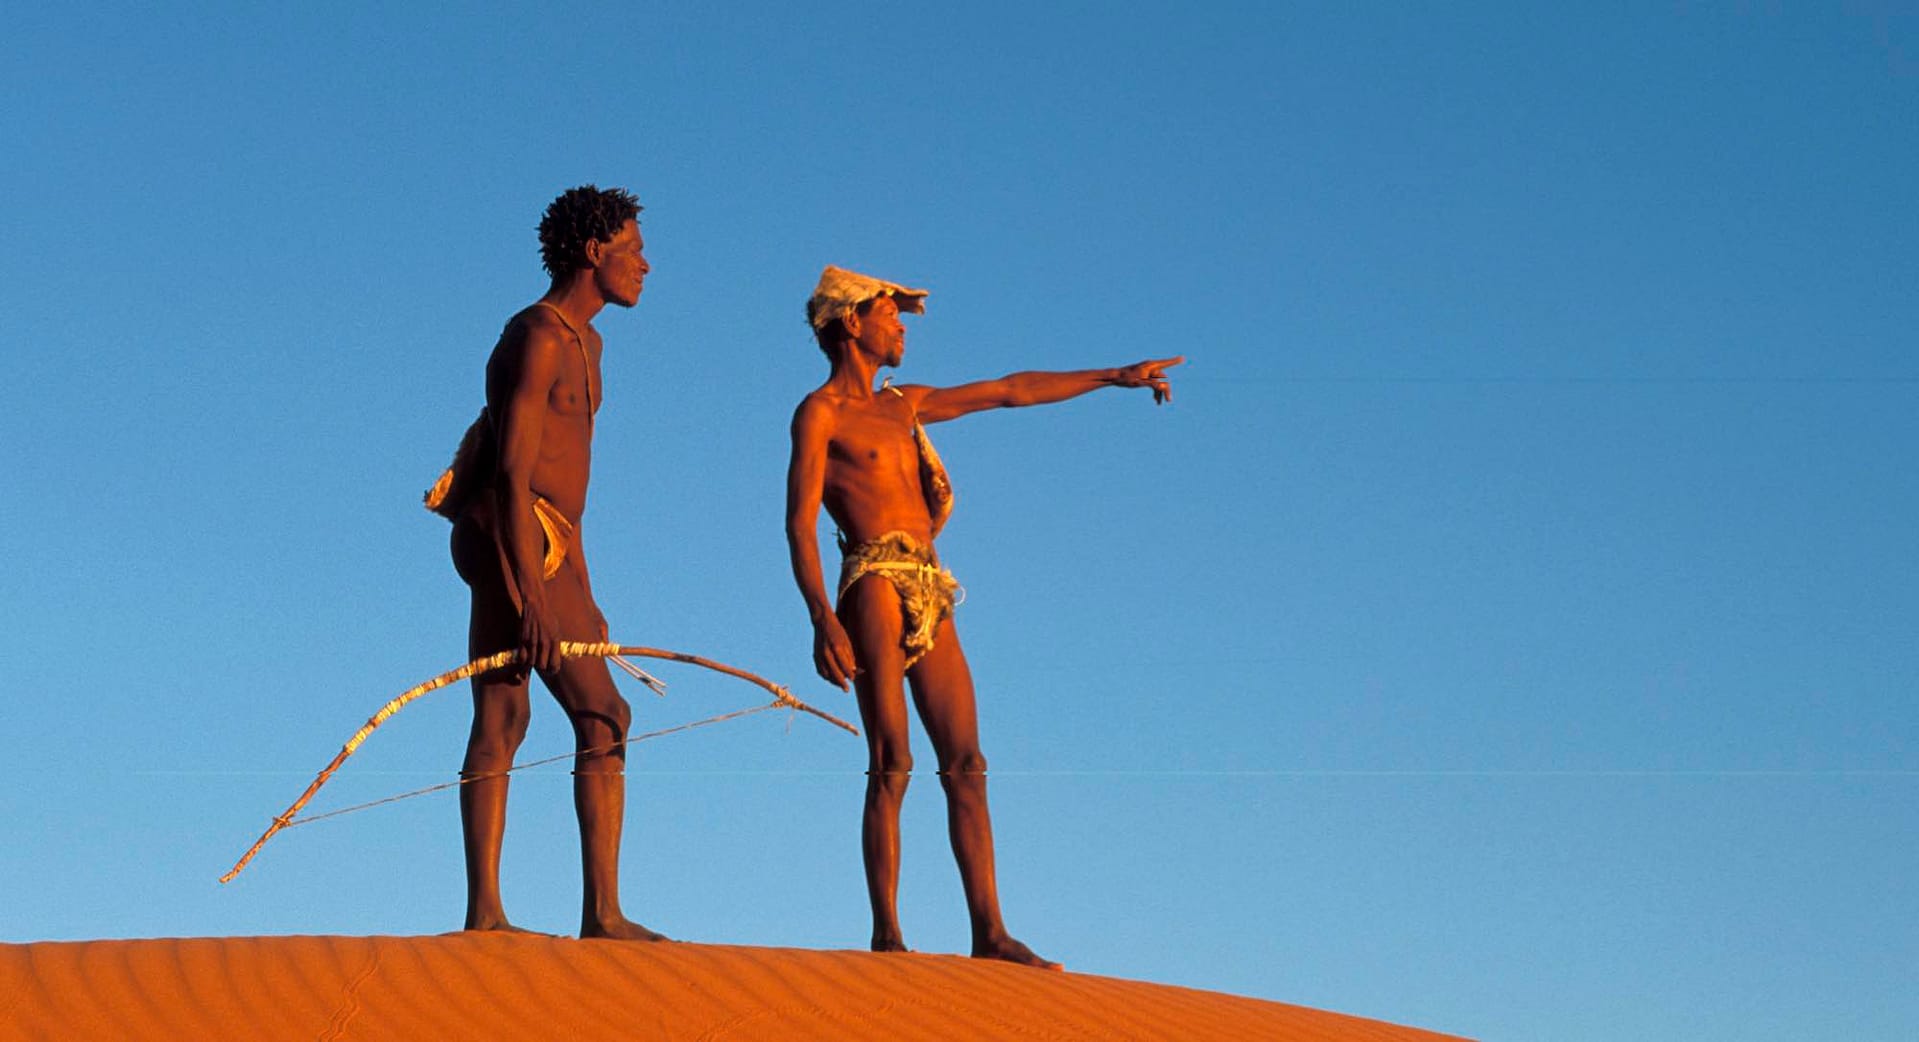 Two San hunters standing on a dune.